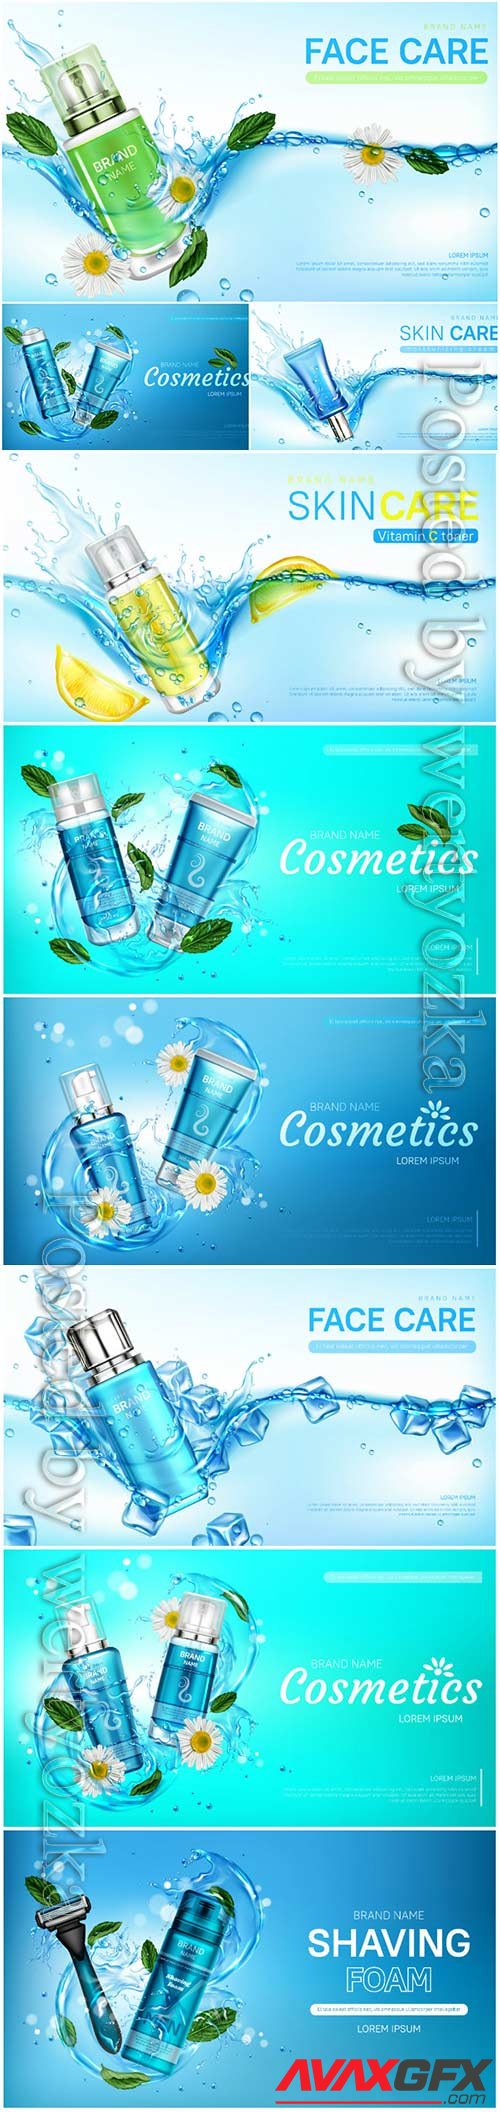 Skin care cosmetics, advertising posters in vector